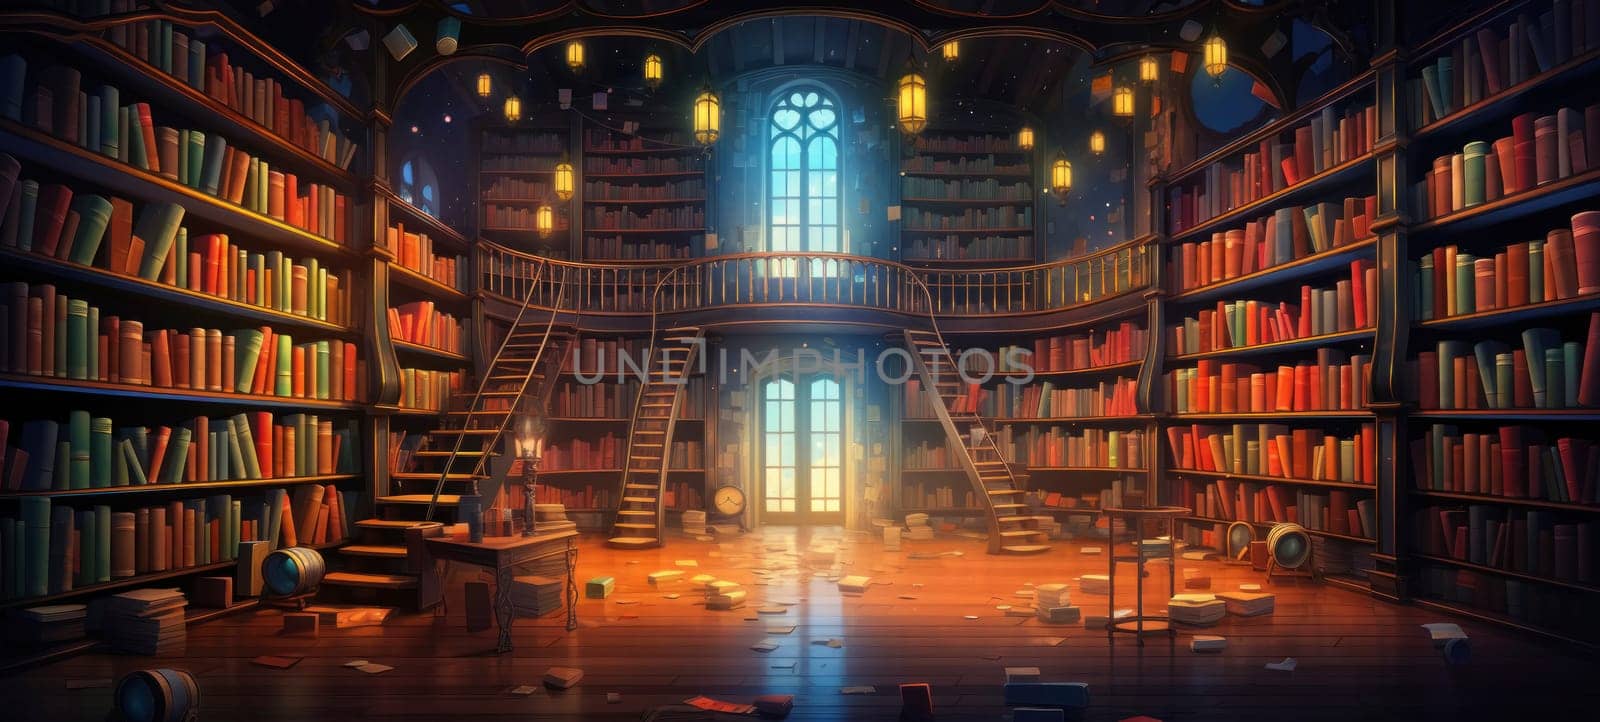 A mystical library interior with books, lanterns, and a grand staircase, evoking a sense of adventure and discovery.